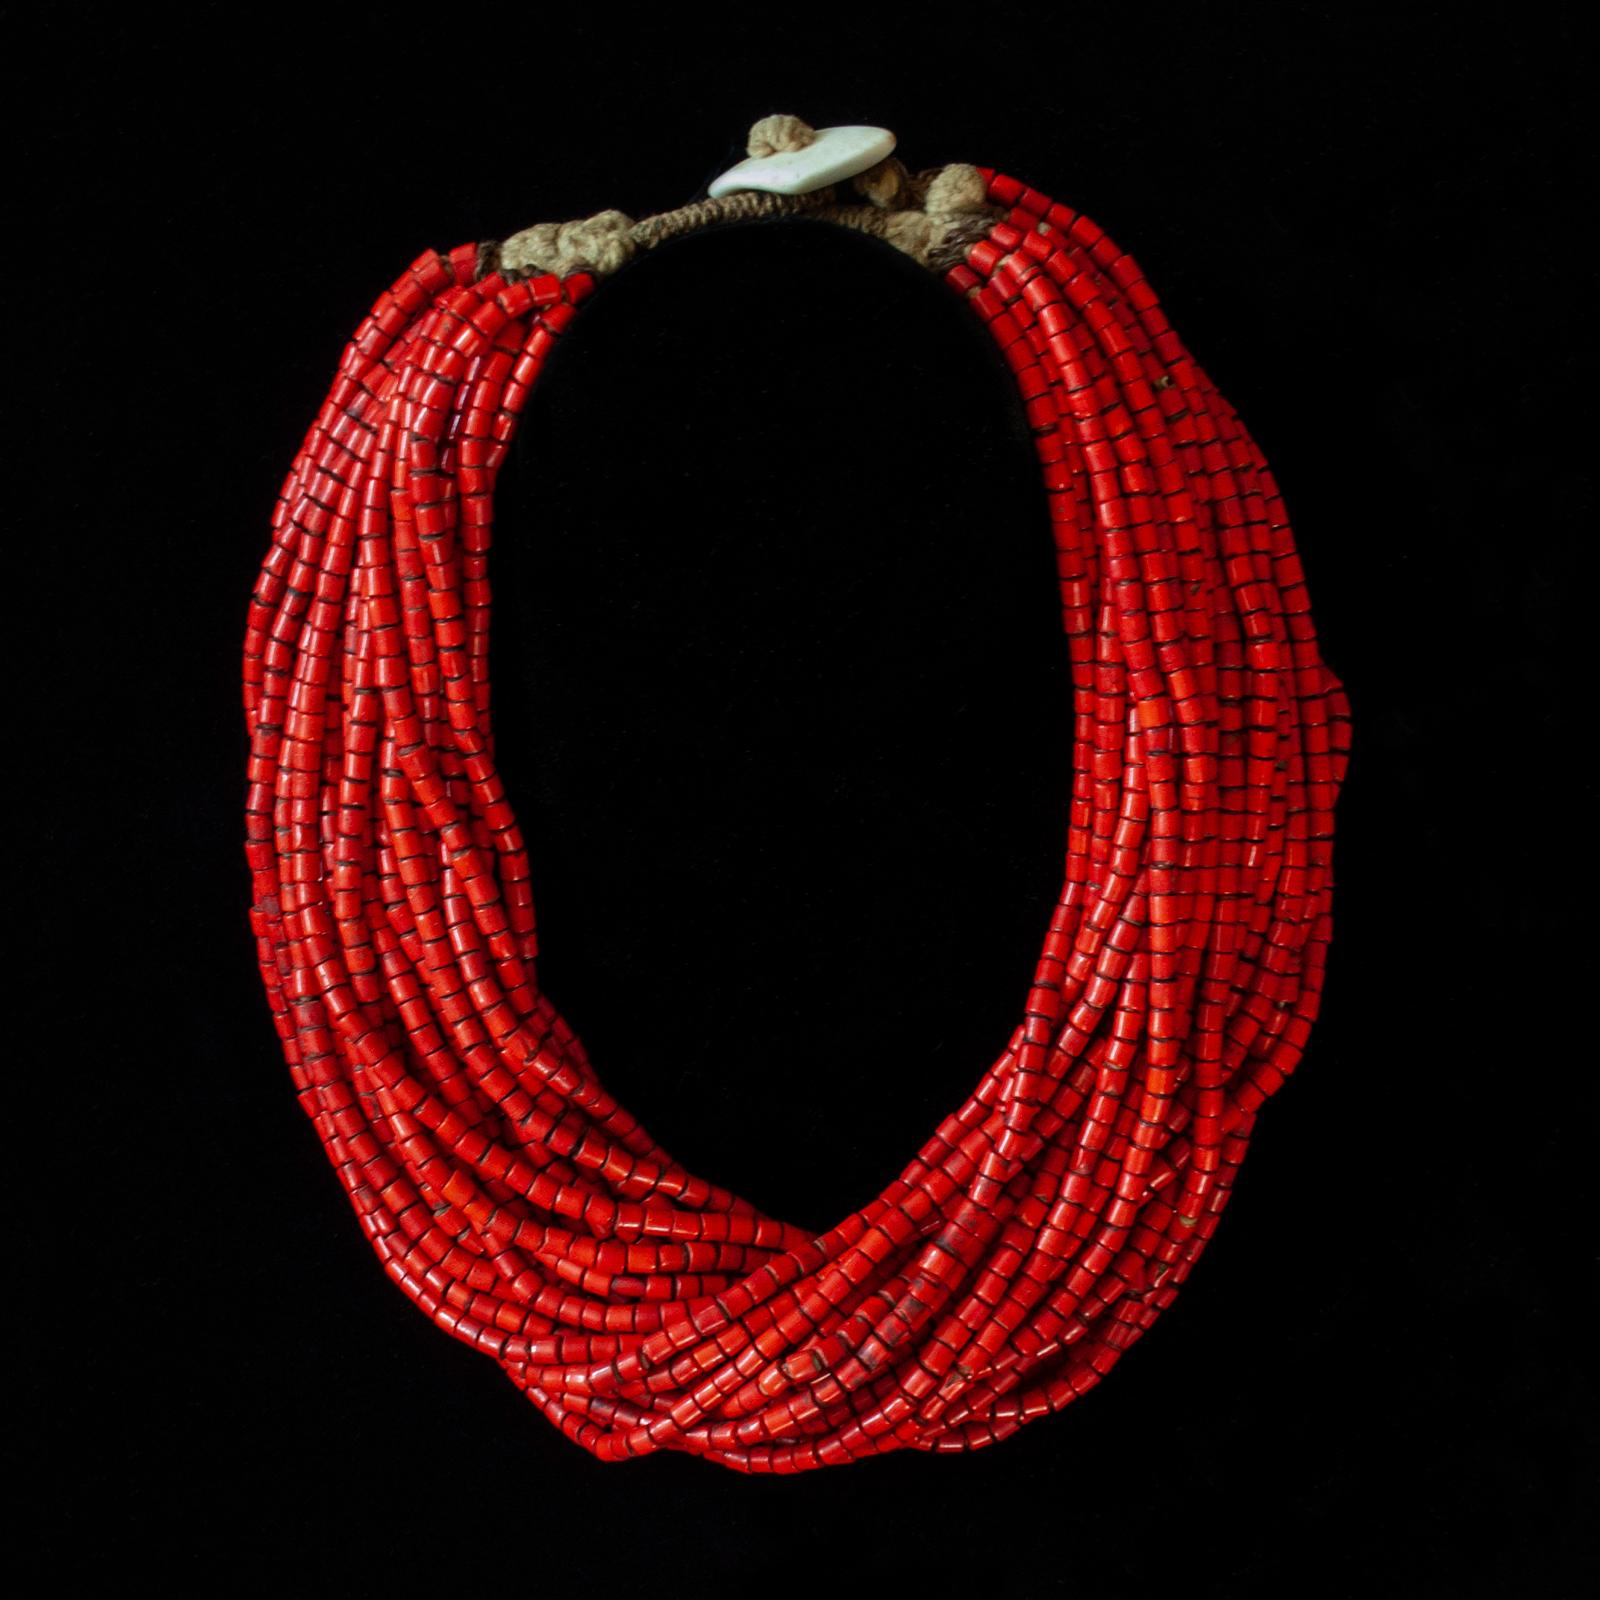 Hand-Crafted Mid-20th Century Red Glass Beaded Multi-Strand Necklace, Naga, India